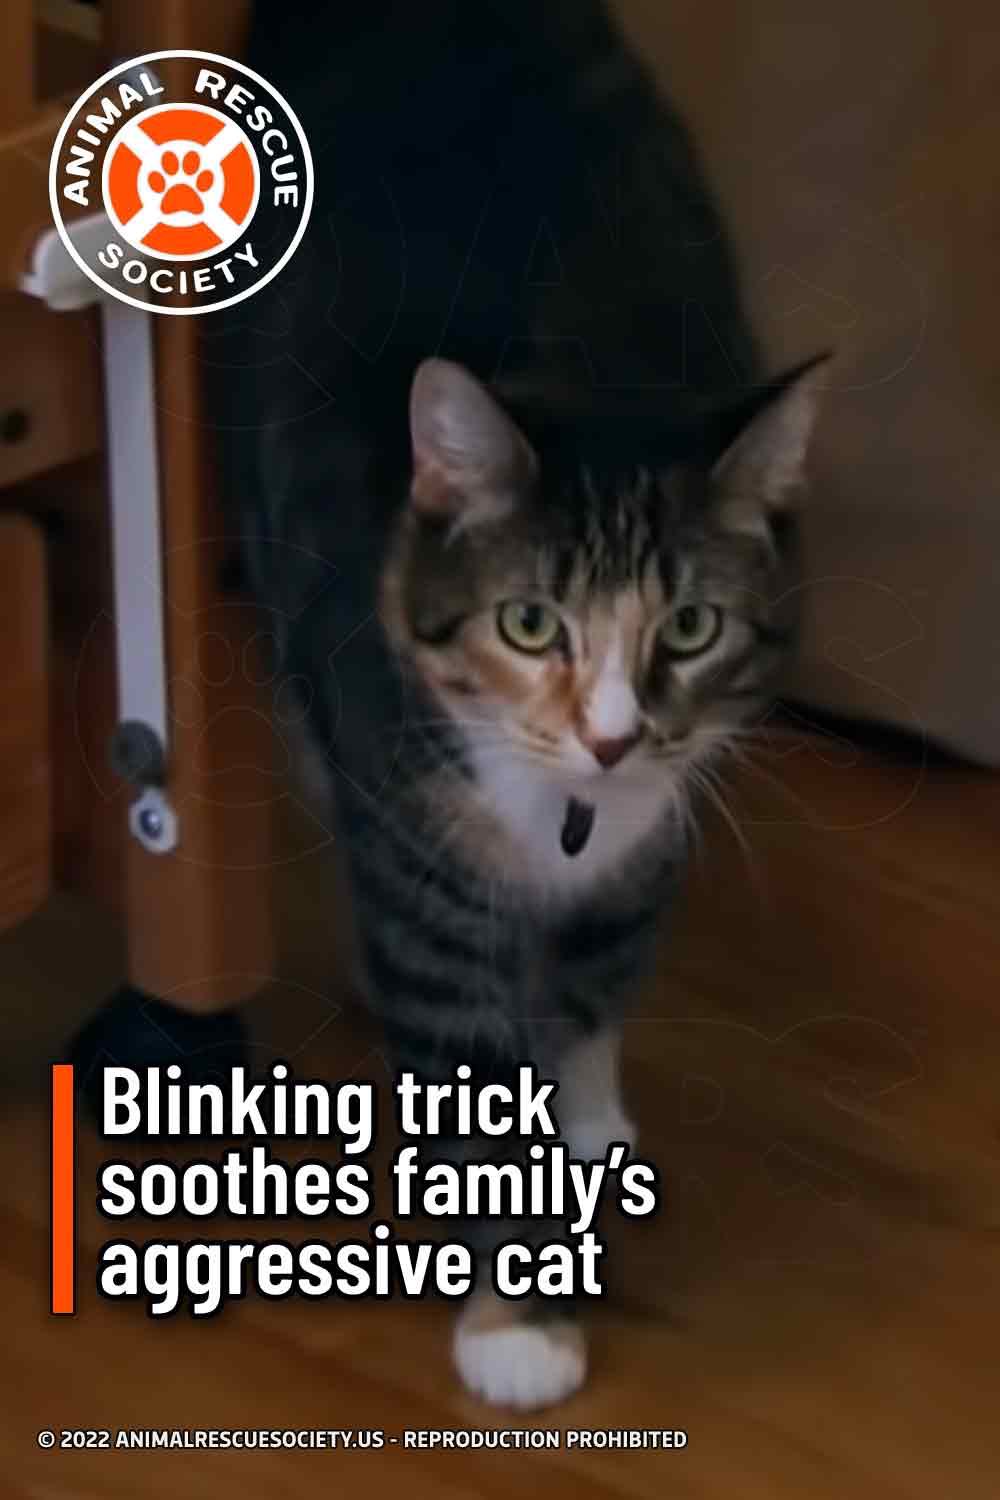 Blinking trick soothes family’s aggressive cat